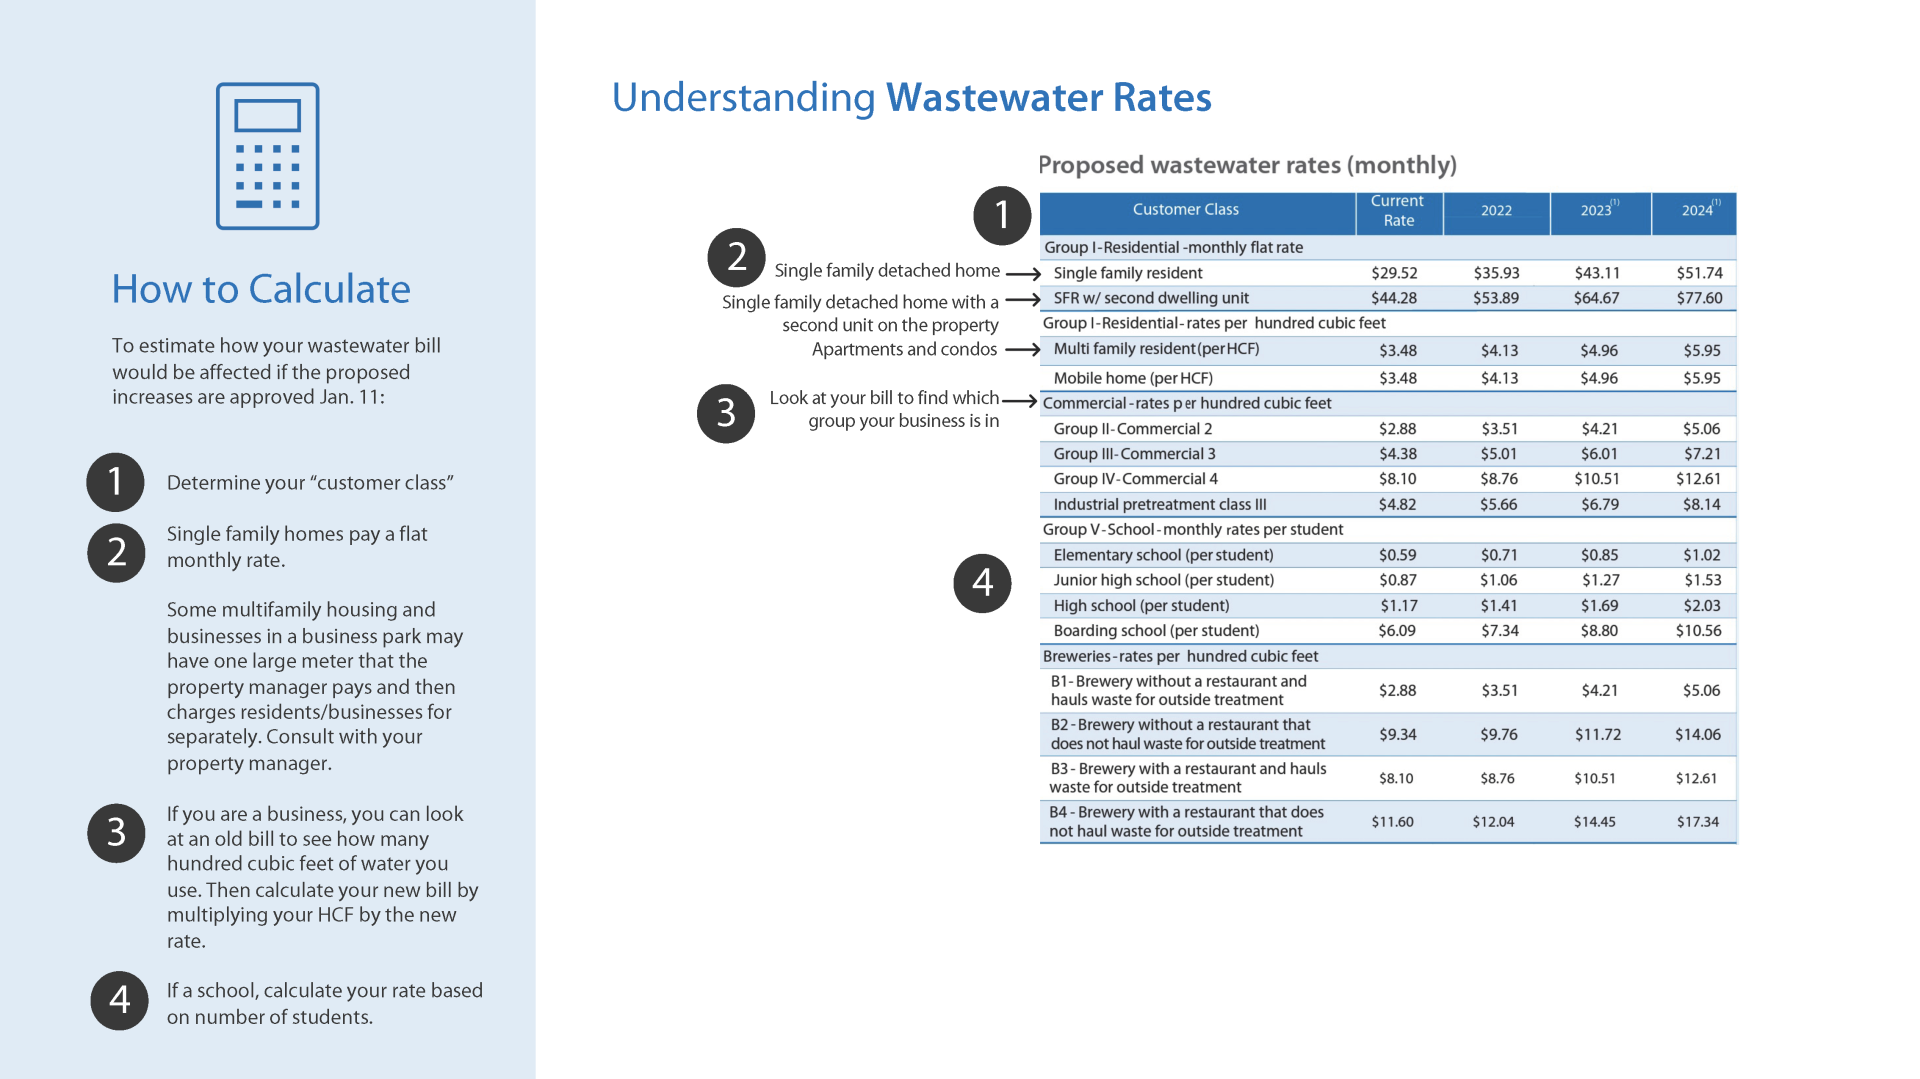 Proposed Wastewater Rates Infographic